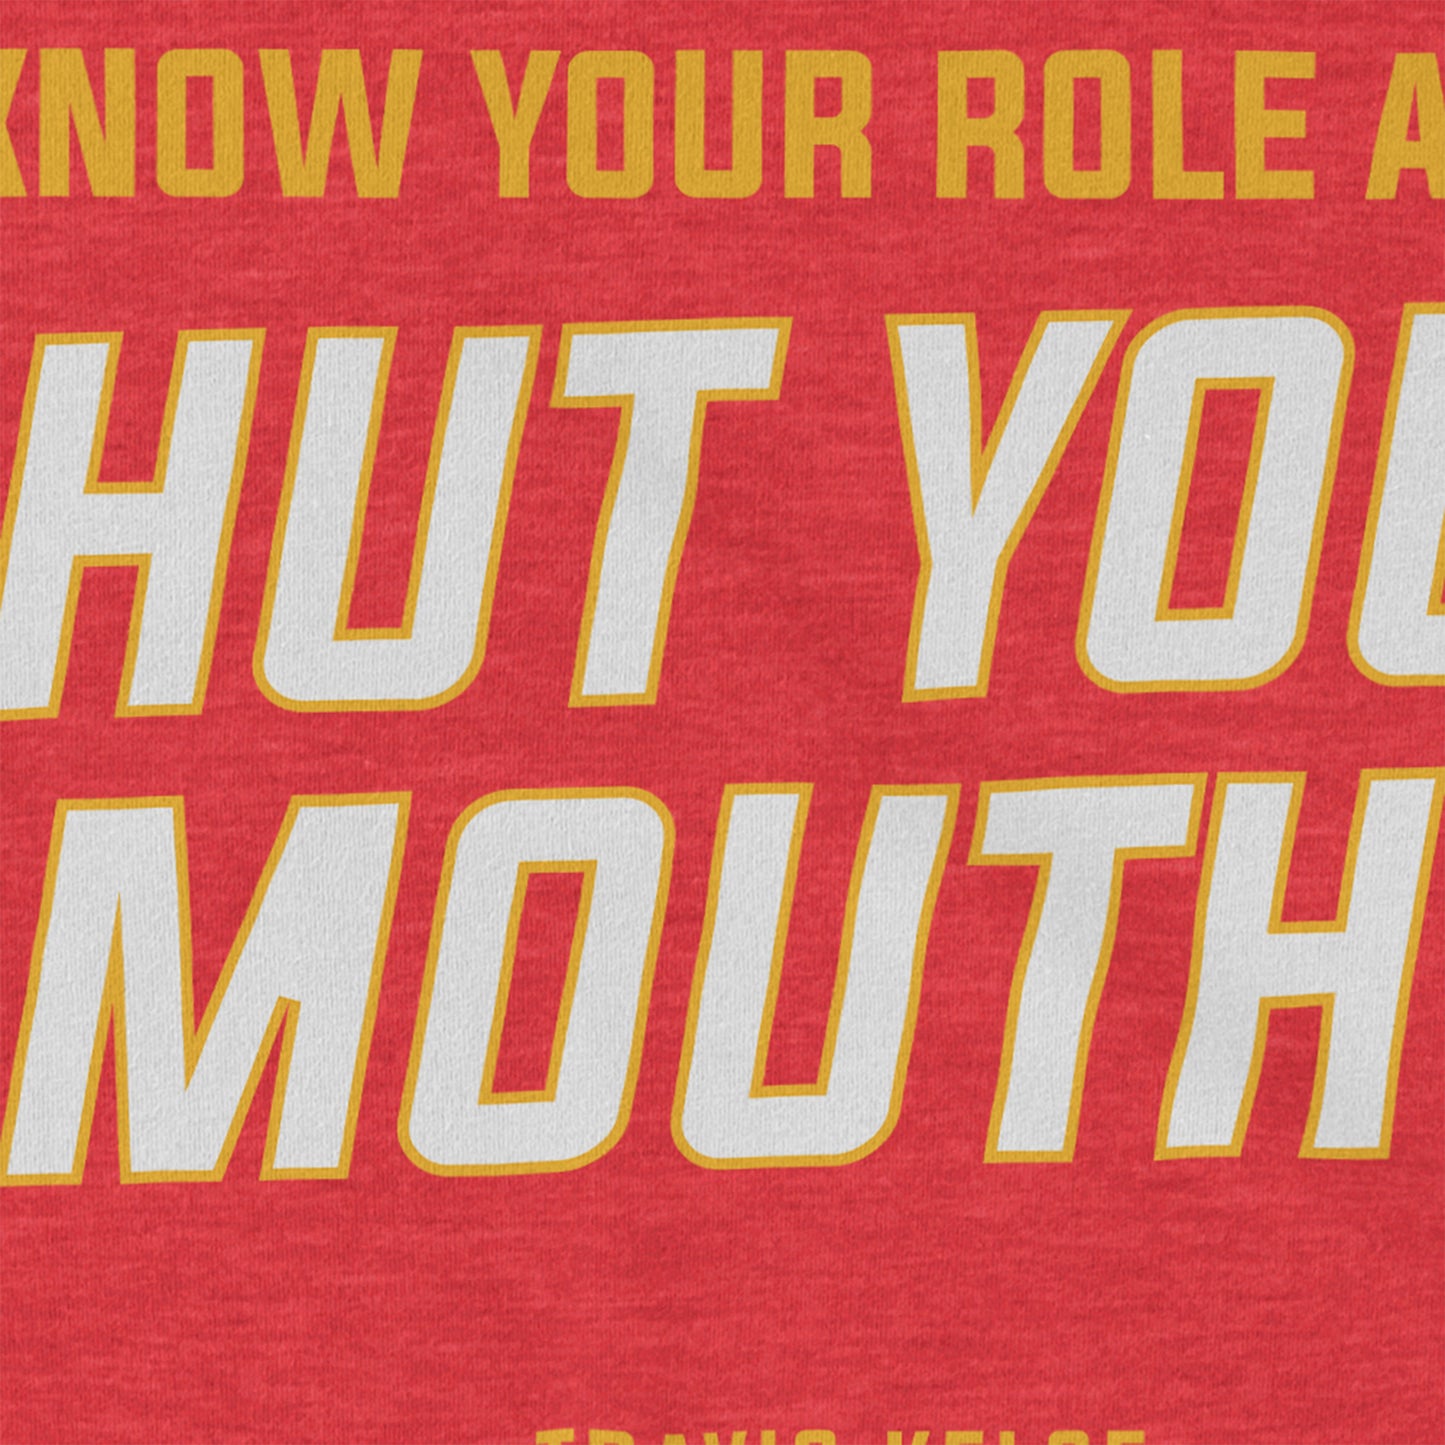 KC Swah Kansas City Chiefs red, yellow, white SHUT YOUR MOUTH on heather red unisex t-shirt closeup details of printed graphics